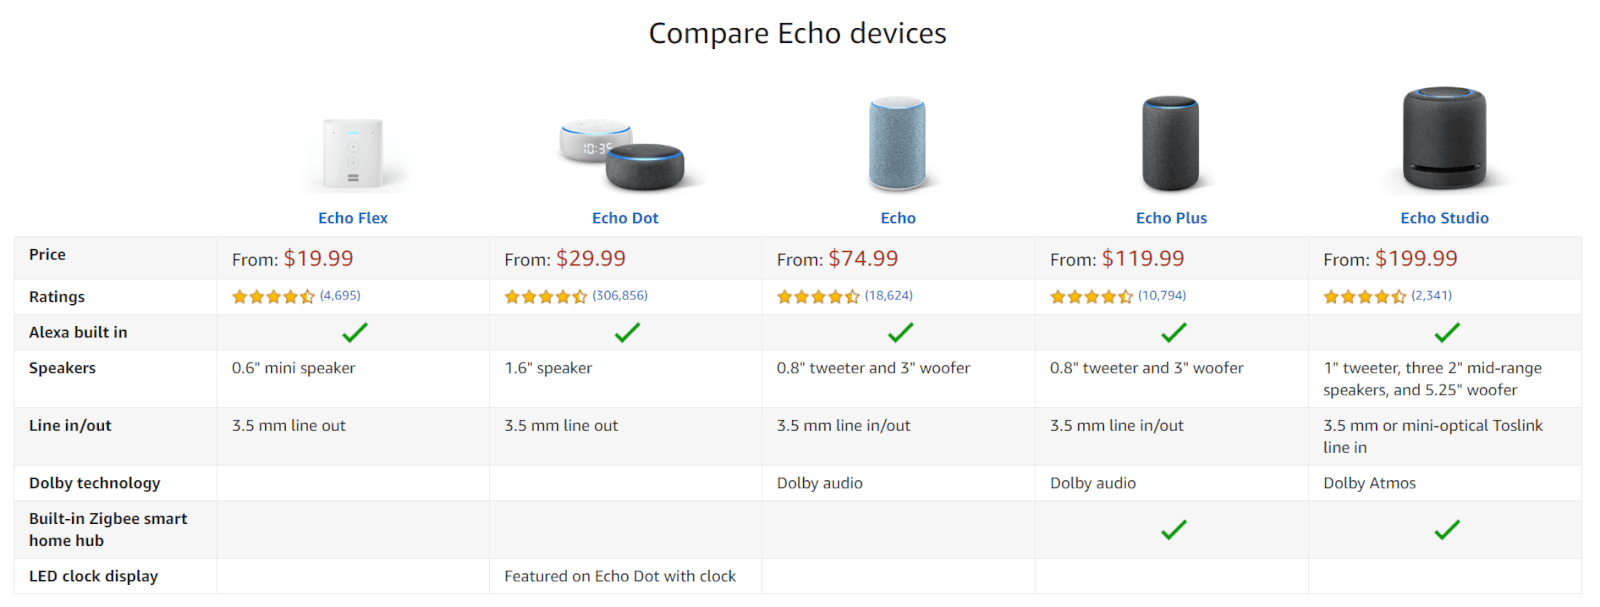 screenshot of chart comparing products